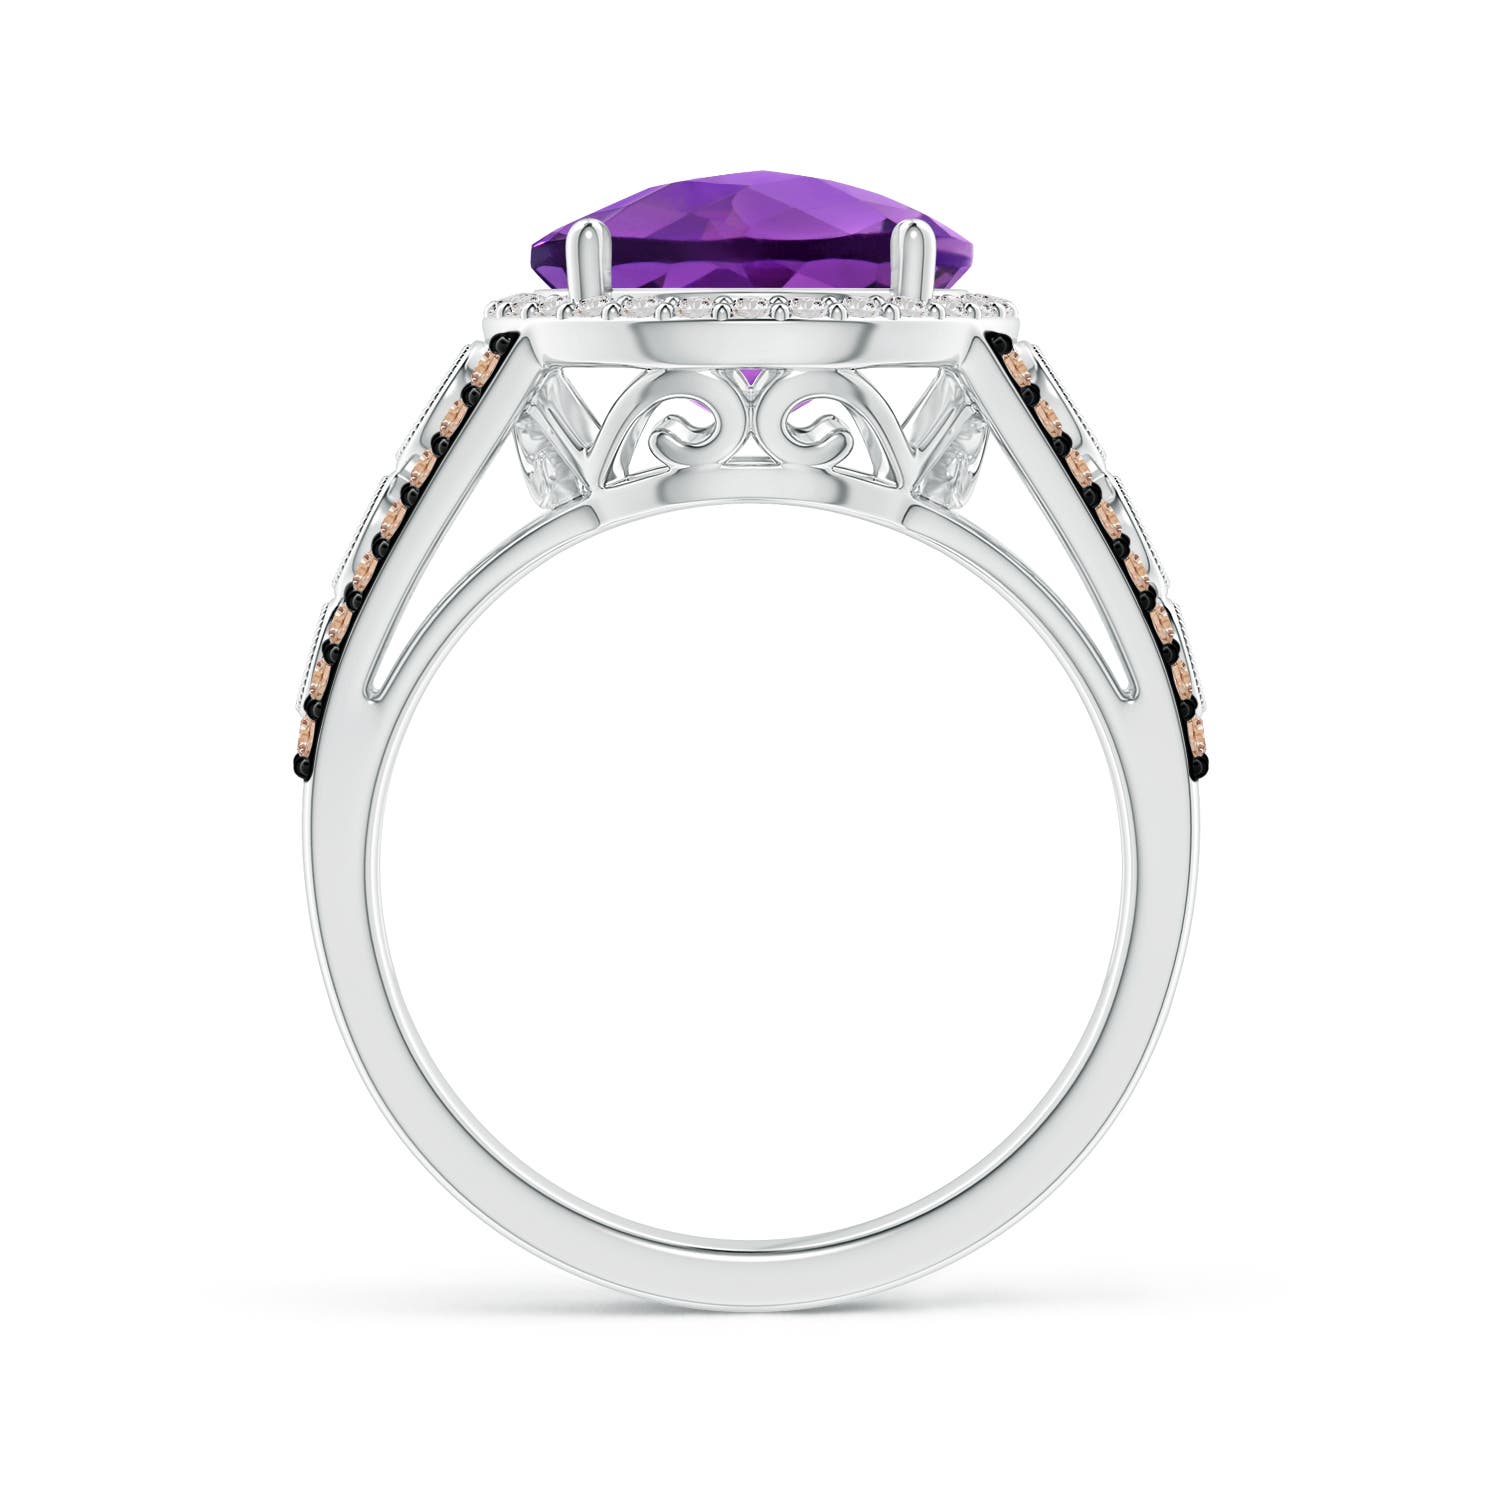 AA - Amethyst / 4.42 CT / 14 KT White Gold